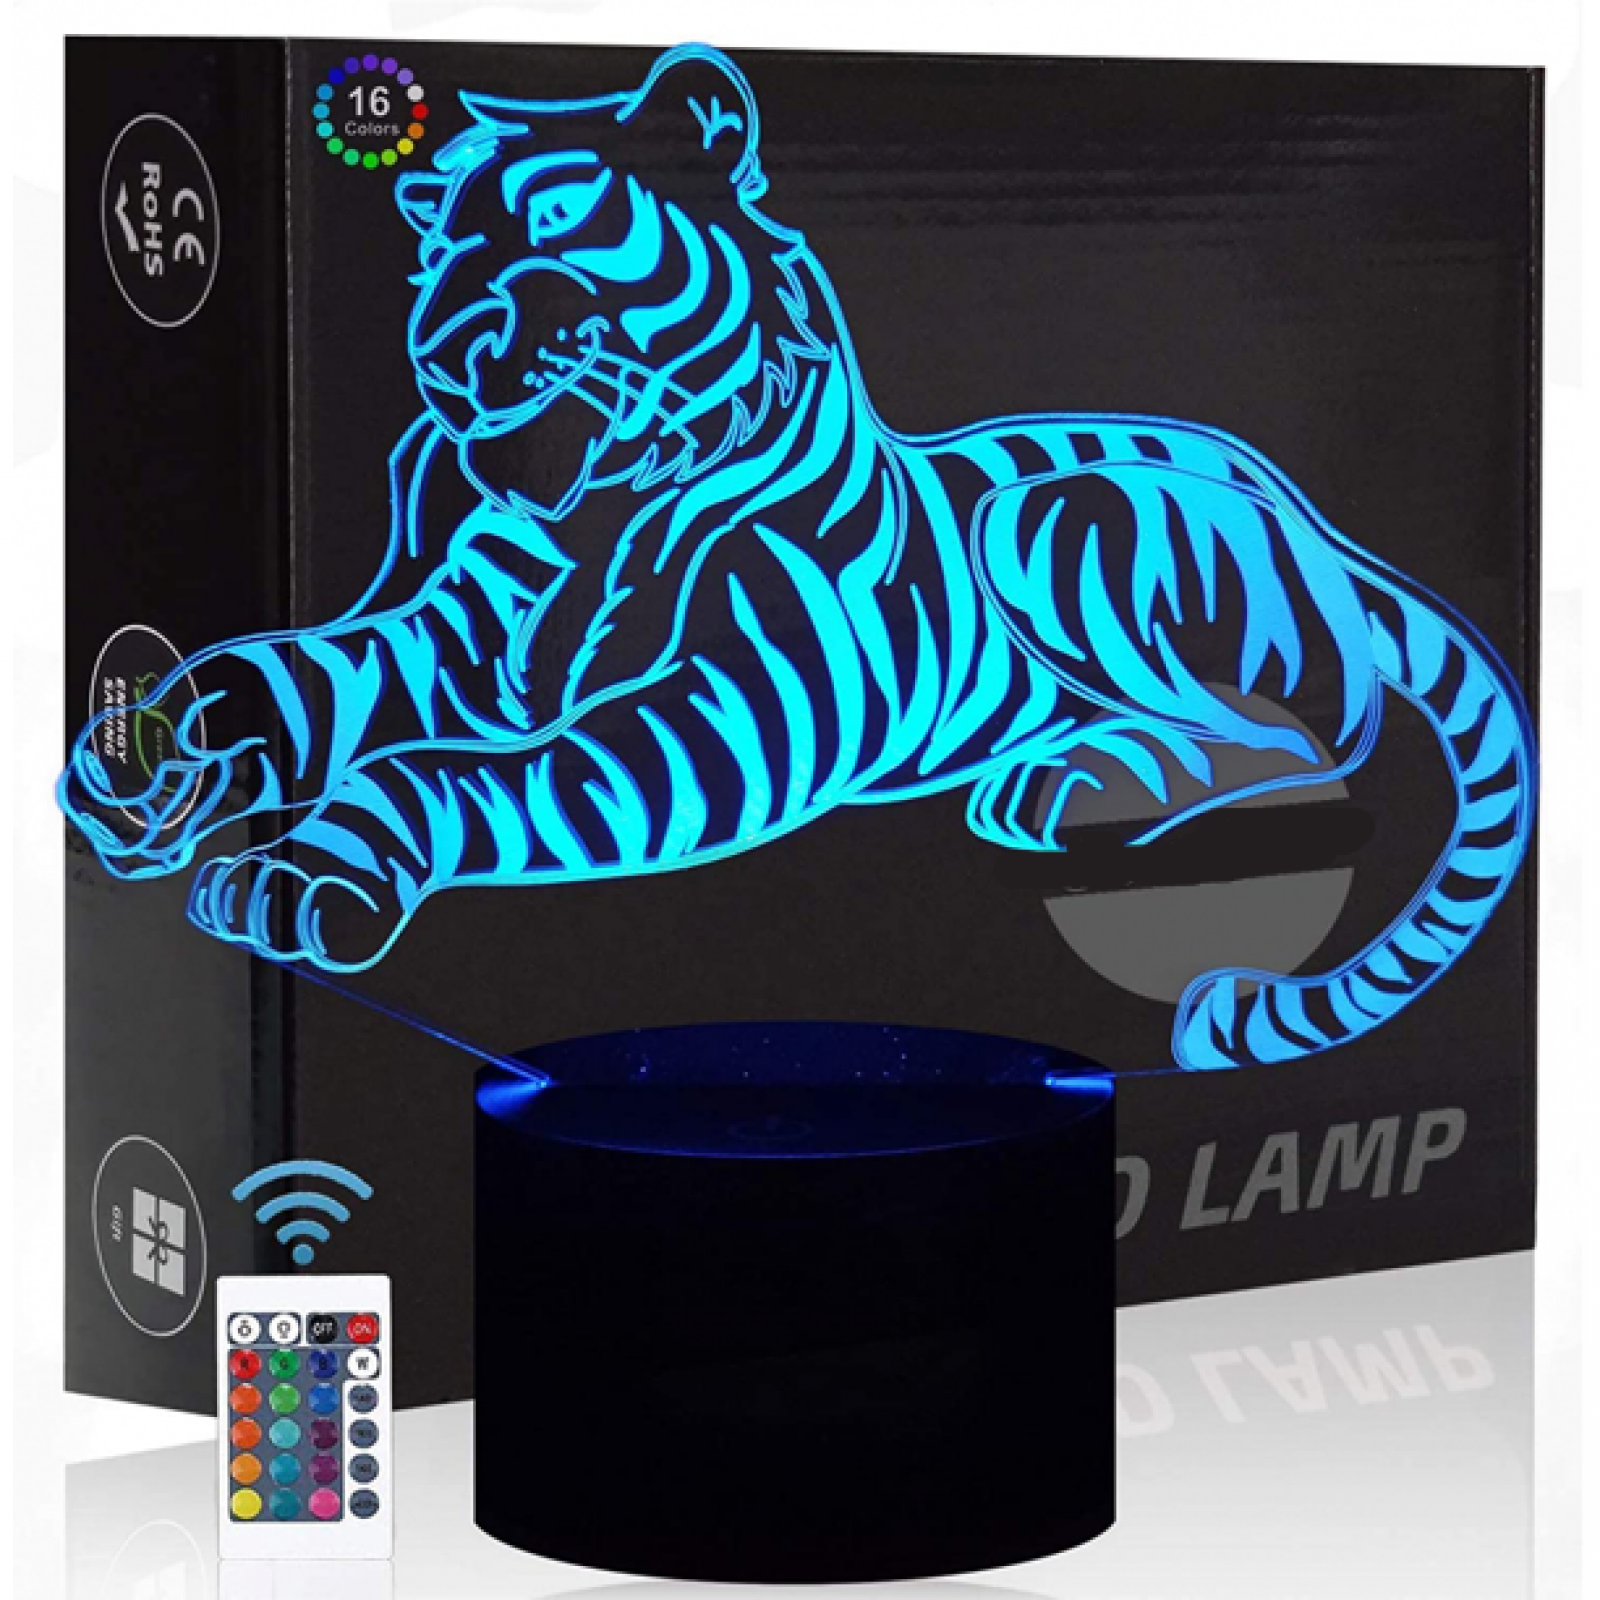 Wekity Tiger 3d Illusion Night Light Toys,16 Colors Change Smart